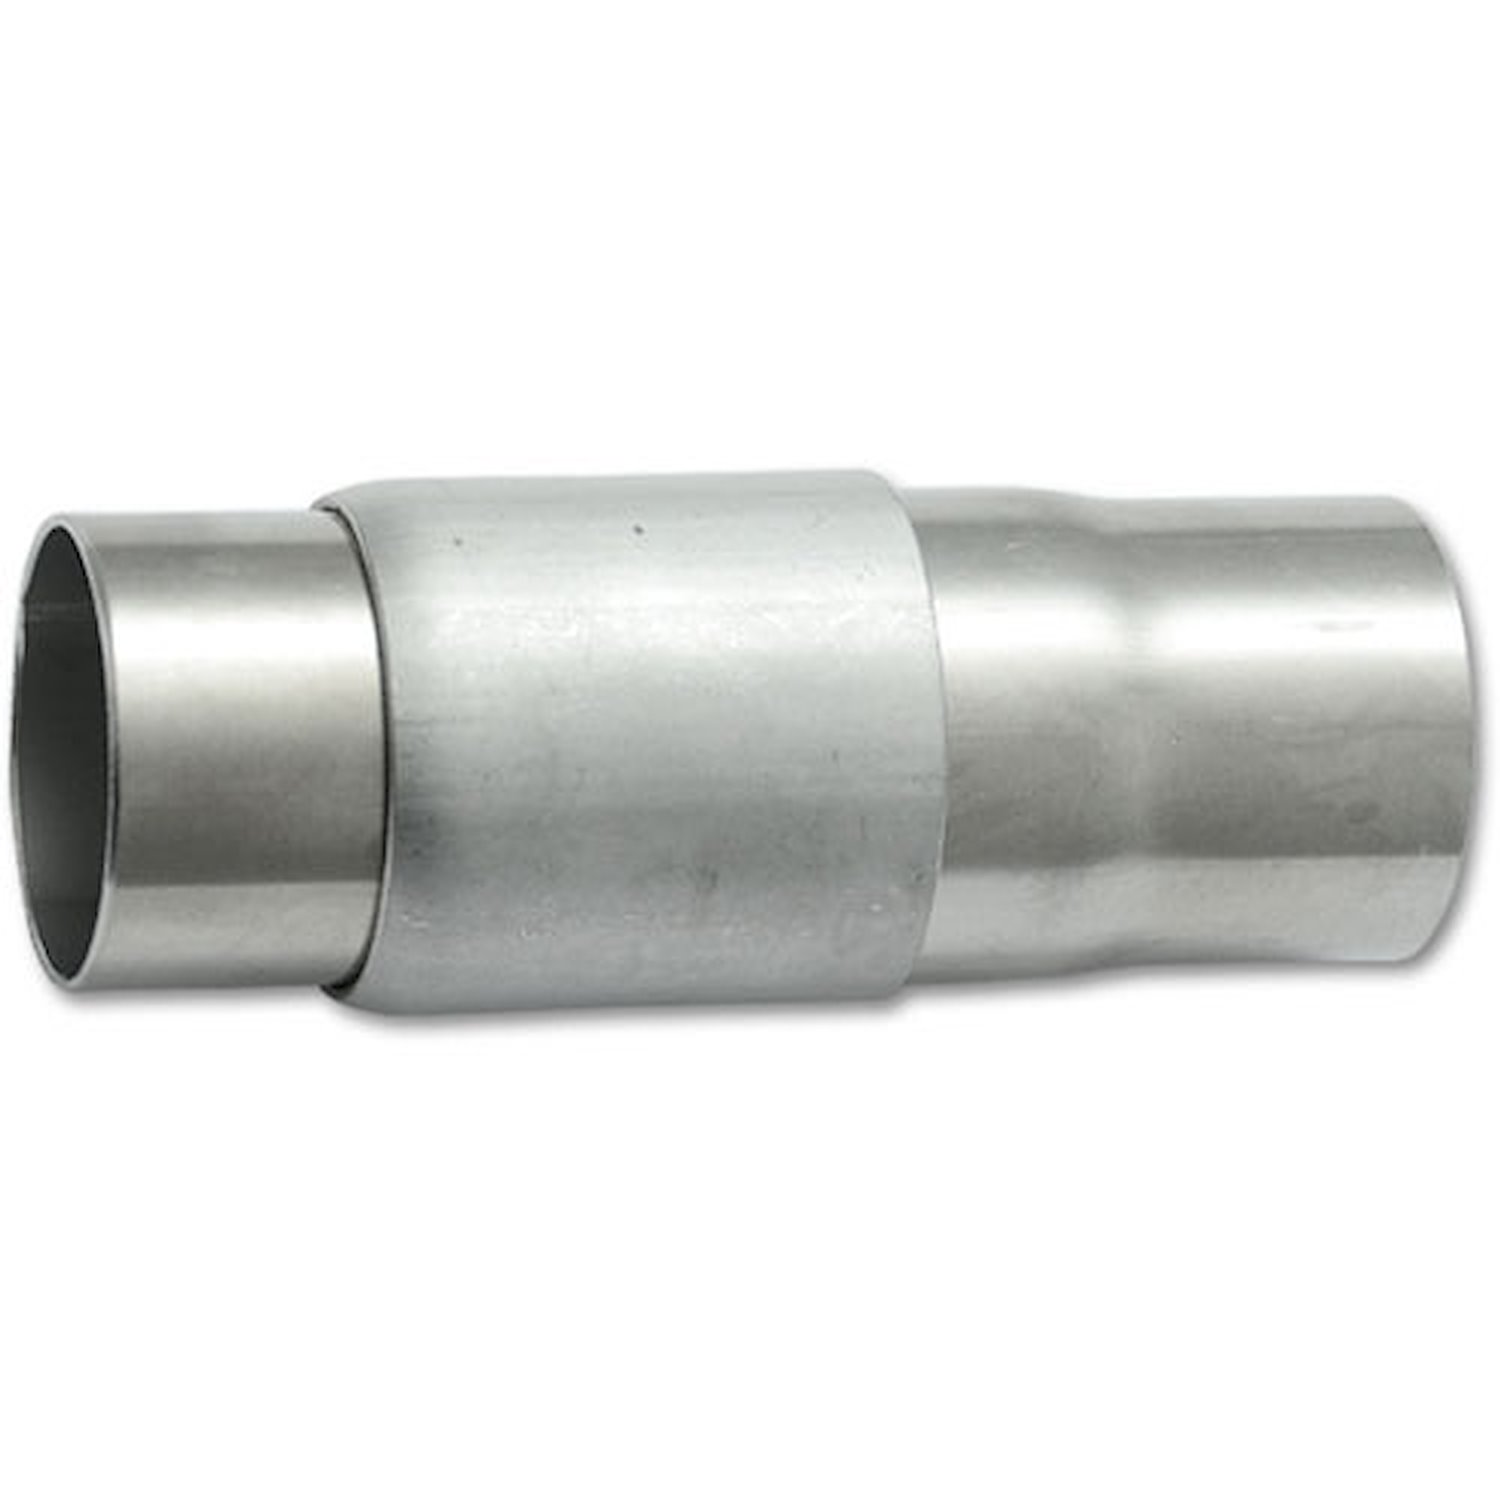 Double Slip Joint Fitting For use with 2